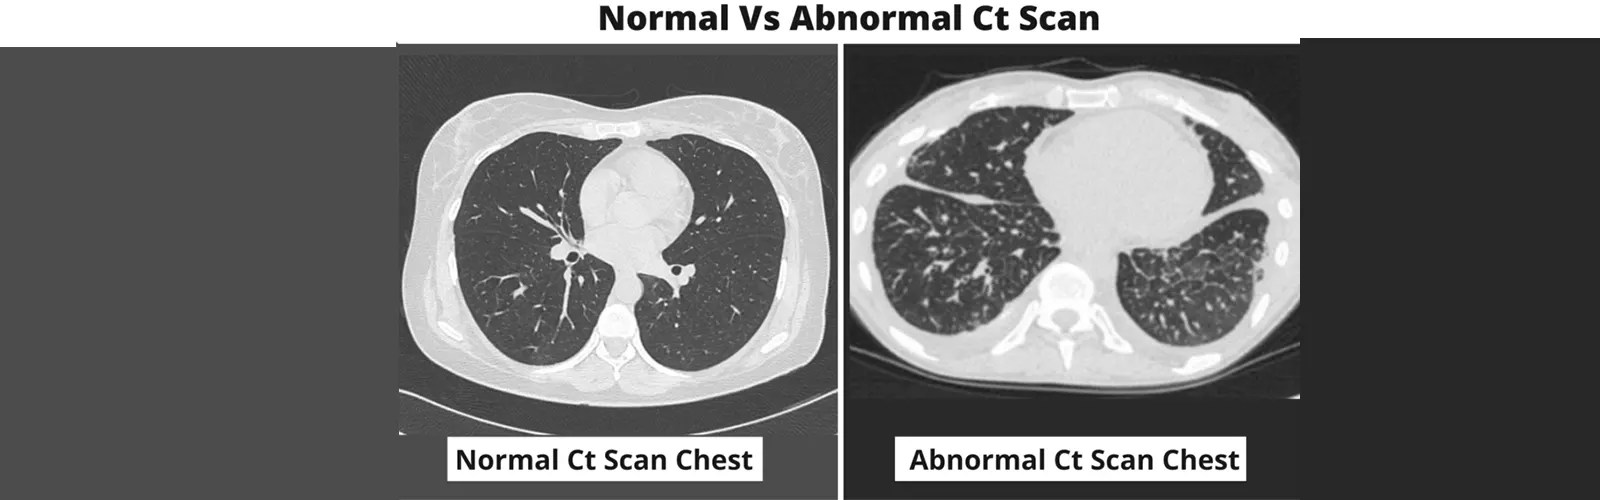 What is NCCT Chest?